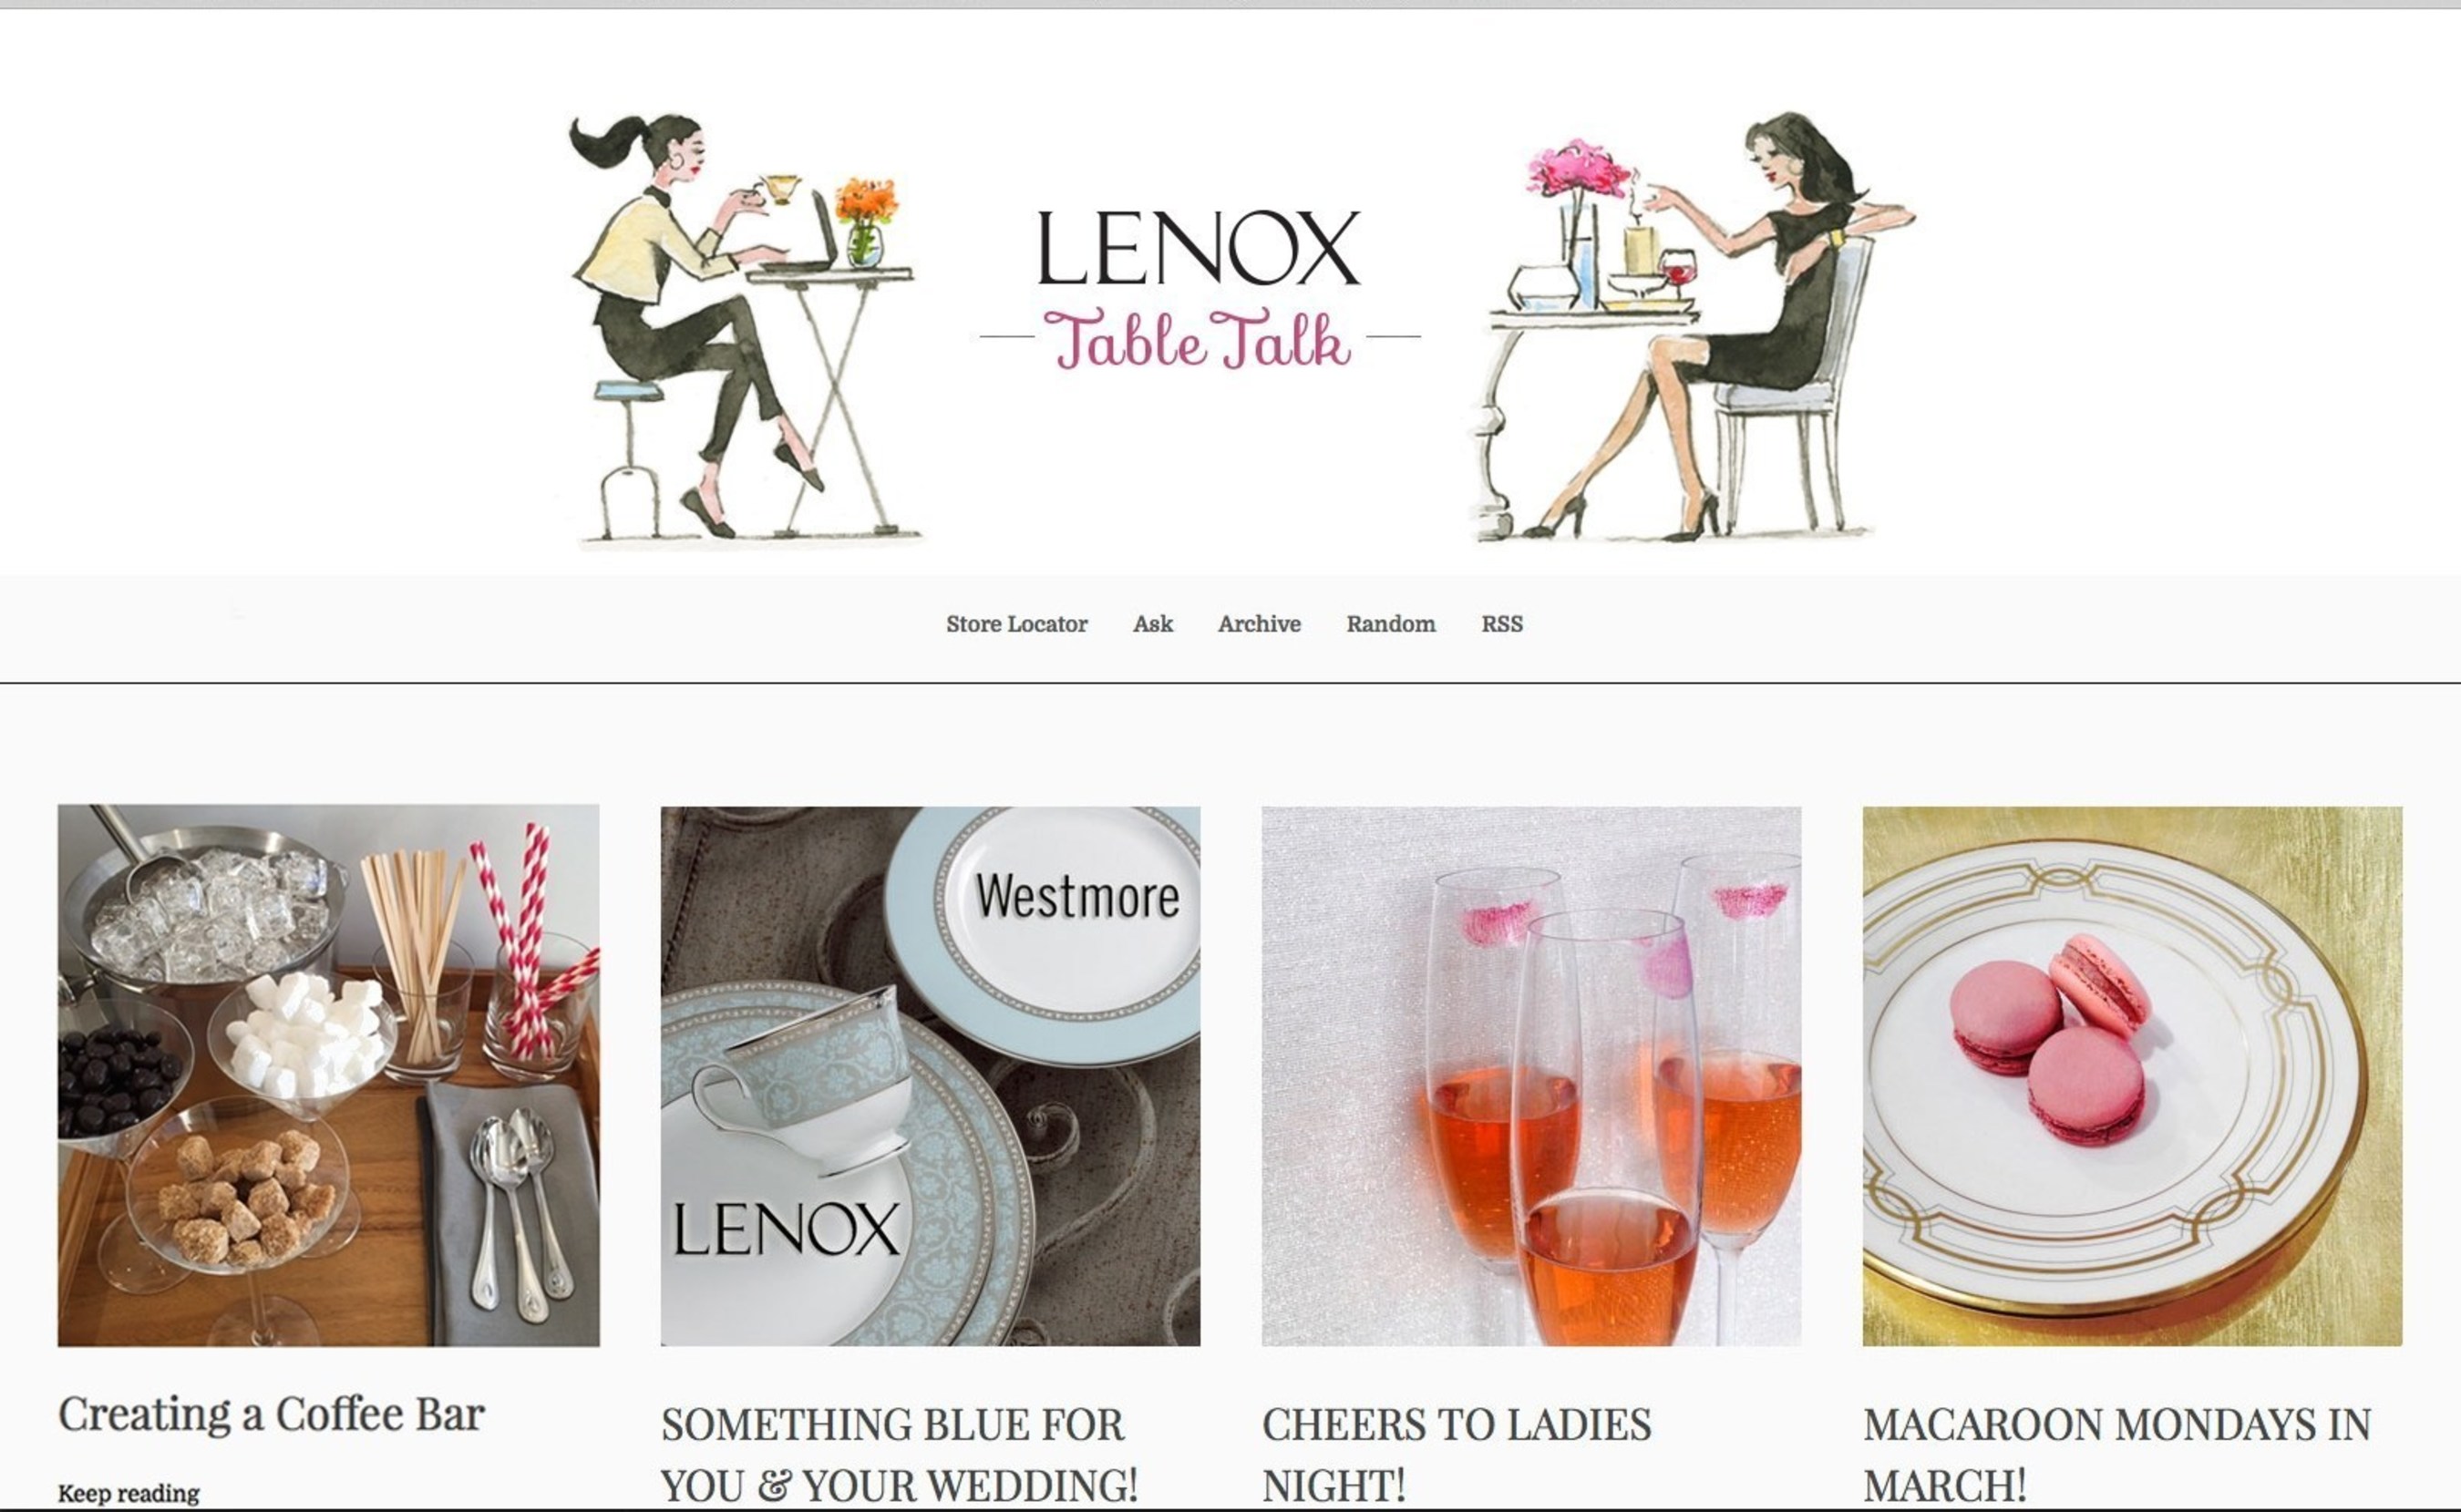 LENOX INTRODUCES 'TABLE TALK' BLOG: A Must-Read New Source For Insights, Ideas & Inspiration from America's Leading Name in Home Entertaining